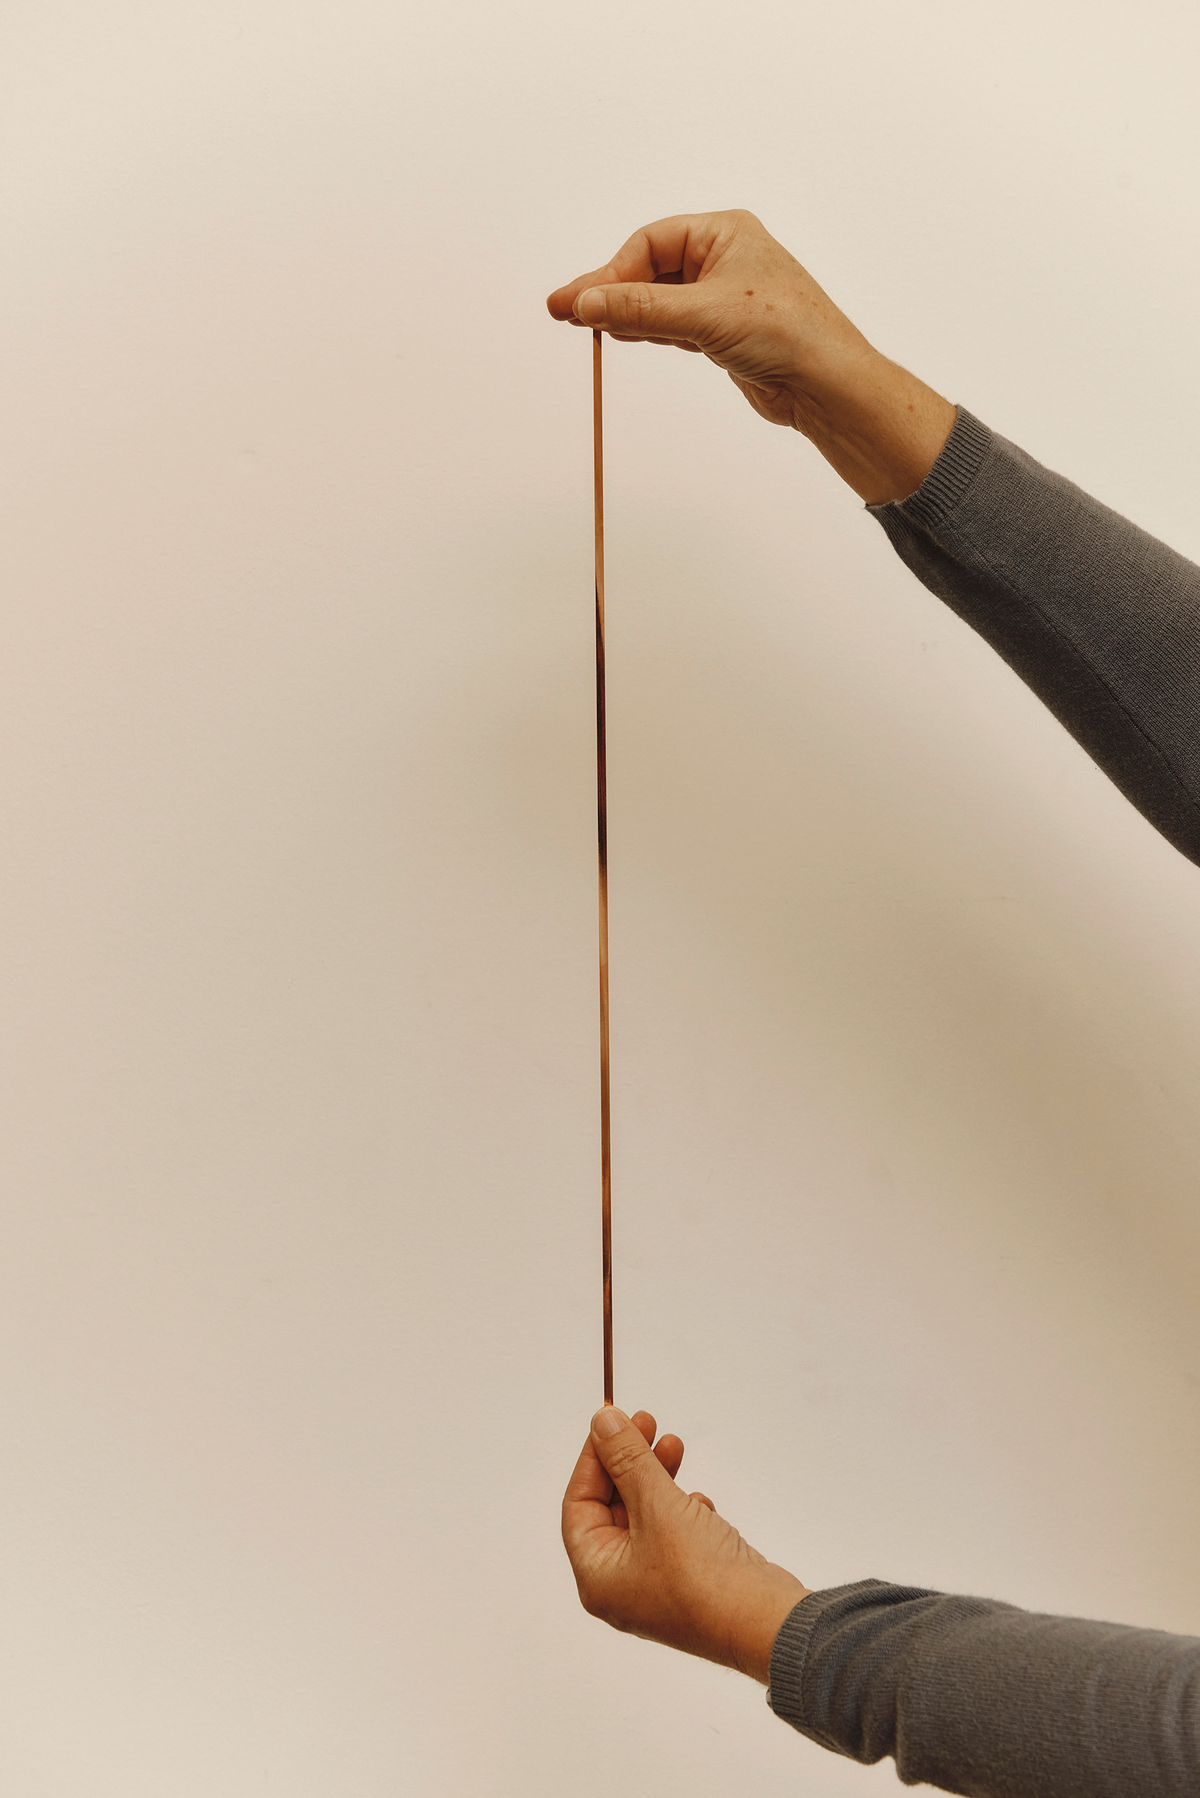 A long thin strip of coppery material is held vertically between a pair of hands in front of a beige background.